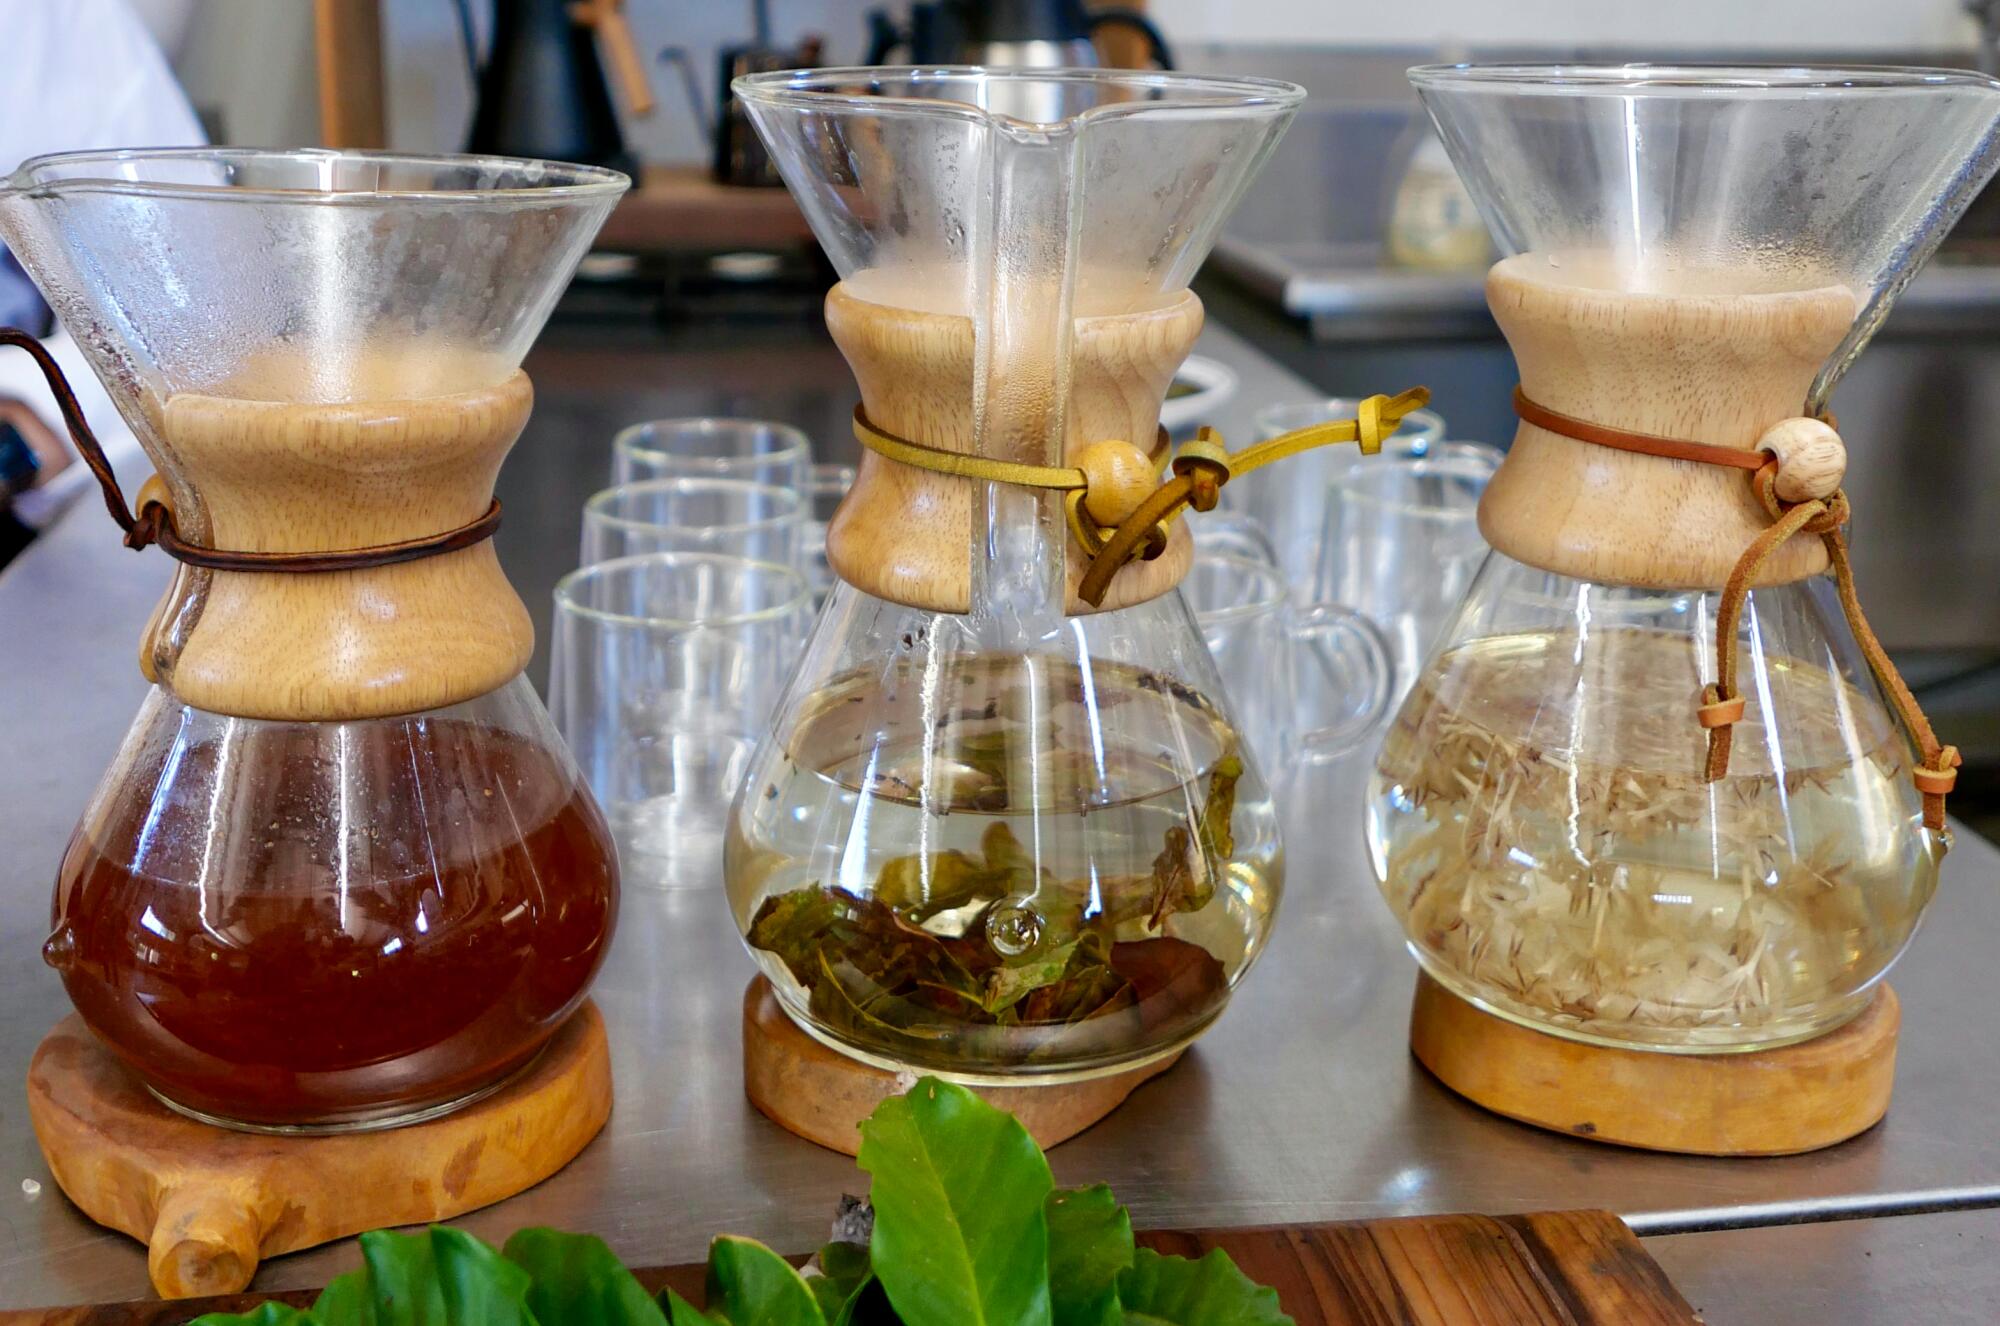 Various parts of the coffee plant, including the leaves and flowers, in three brewed infusions.